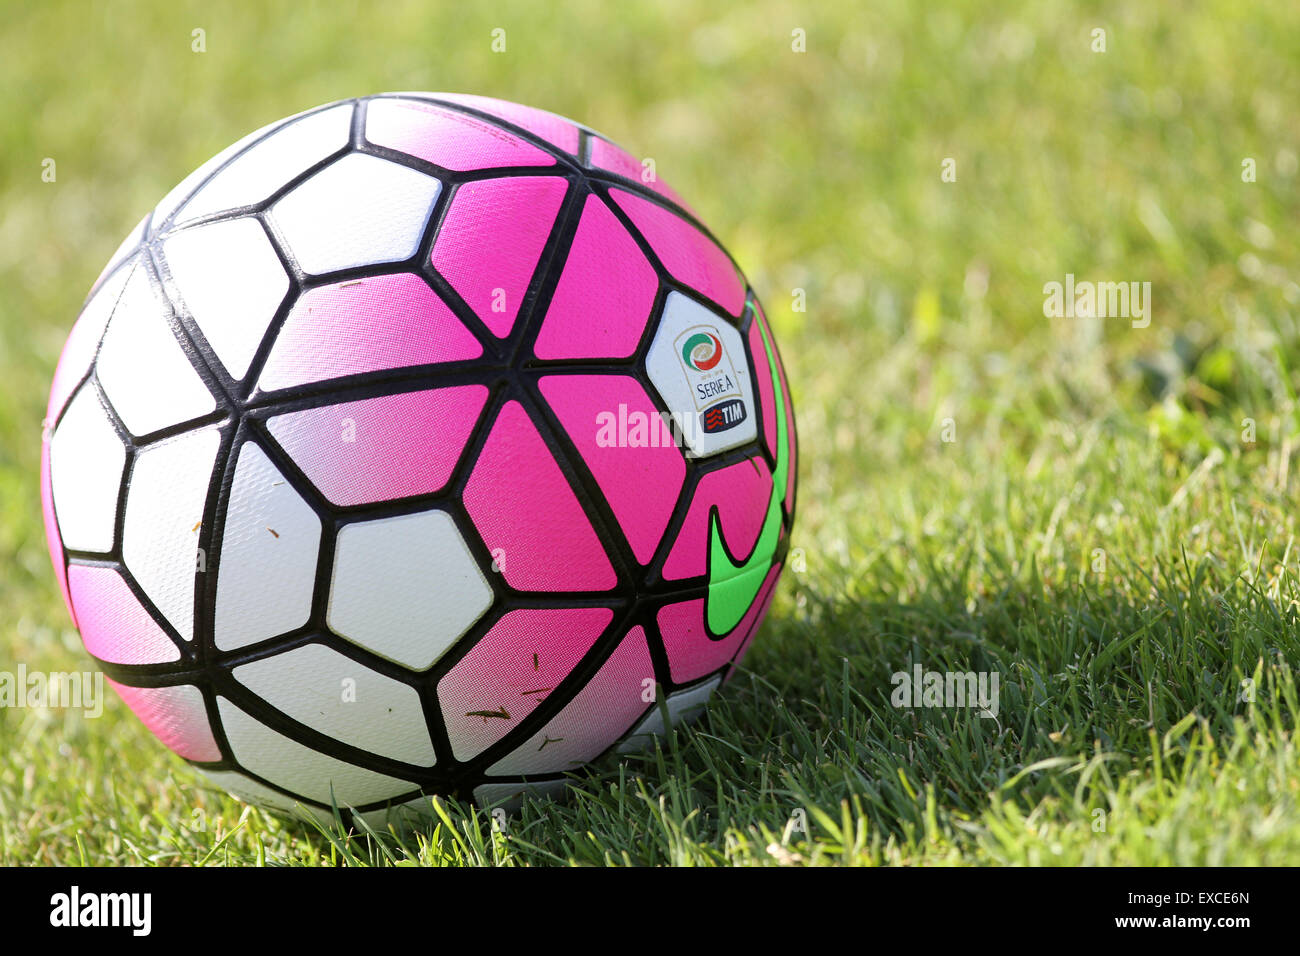 Udine, Italy. 11th July, 2015. The new ball of the Italian Serie A season  2015-2016 used during a training session of Udinese Calcio pre-season  2015-16 on Saturday 11 July, 2015 at Bruseschi